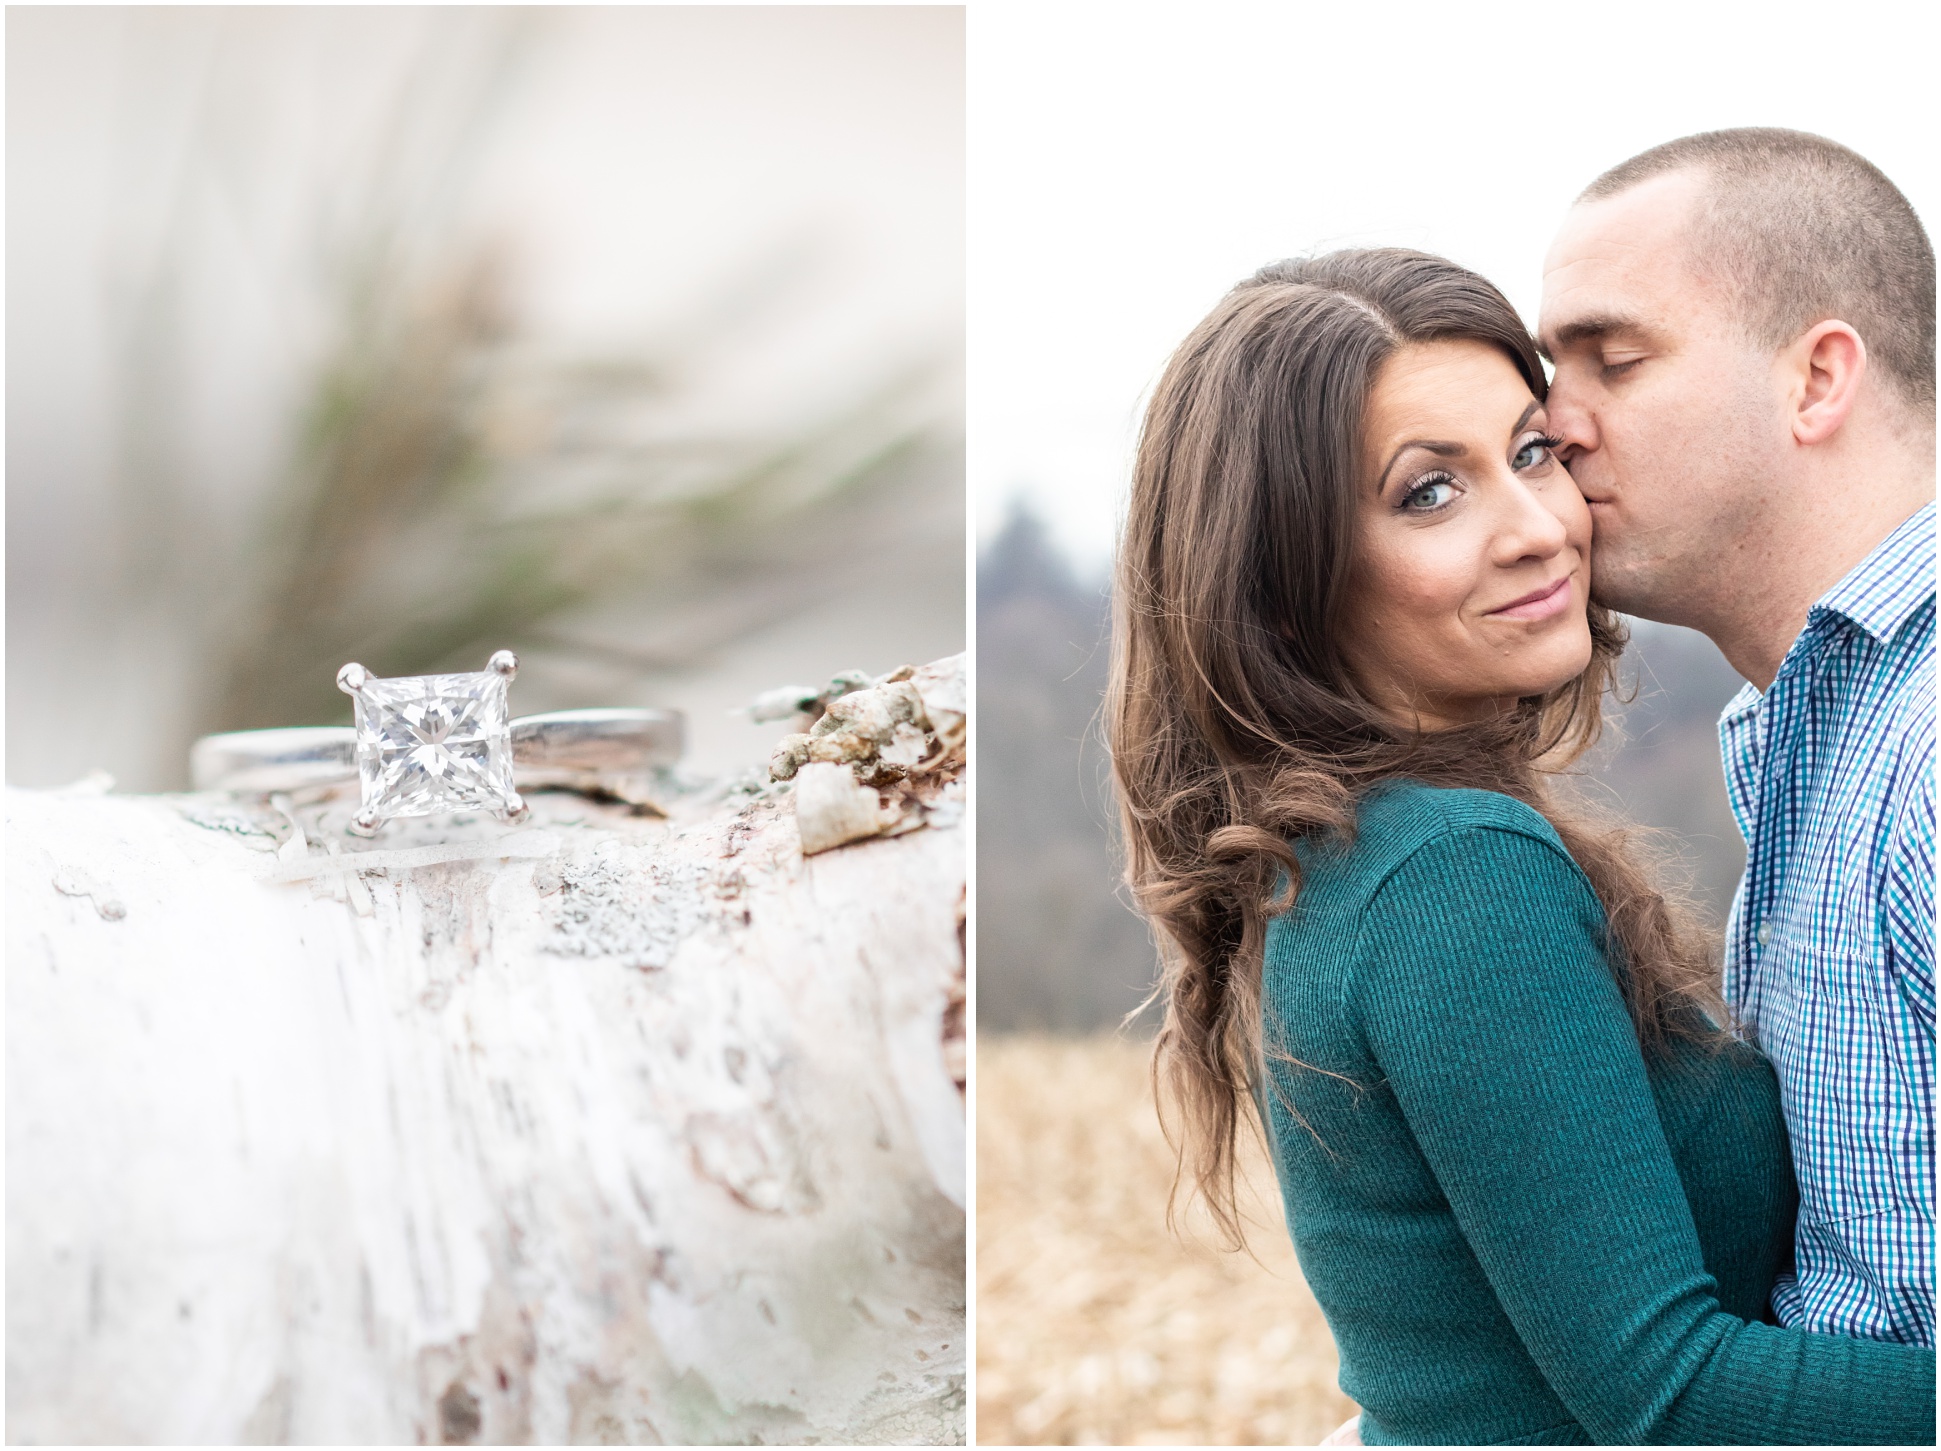 Left Image: square diamond engagement right on a piece of white birch with evergreen pines, right image: Ryan kissing Valerie in the corn field